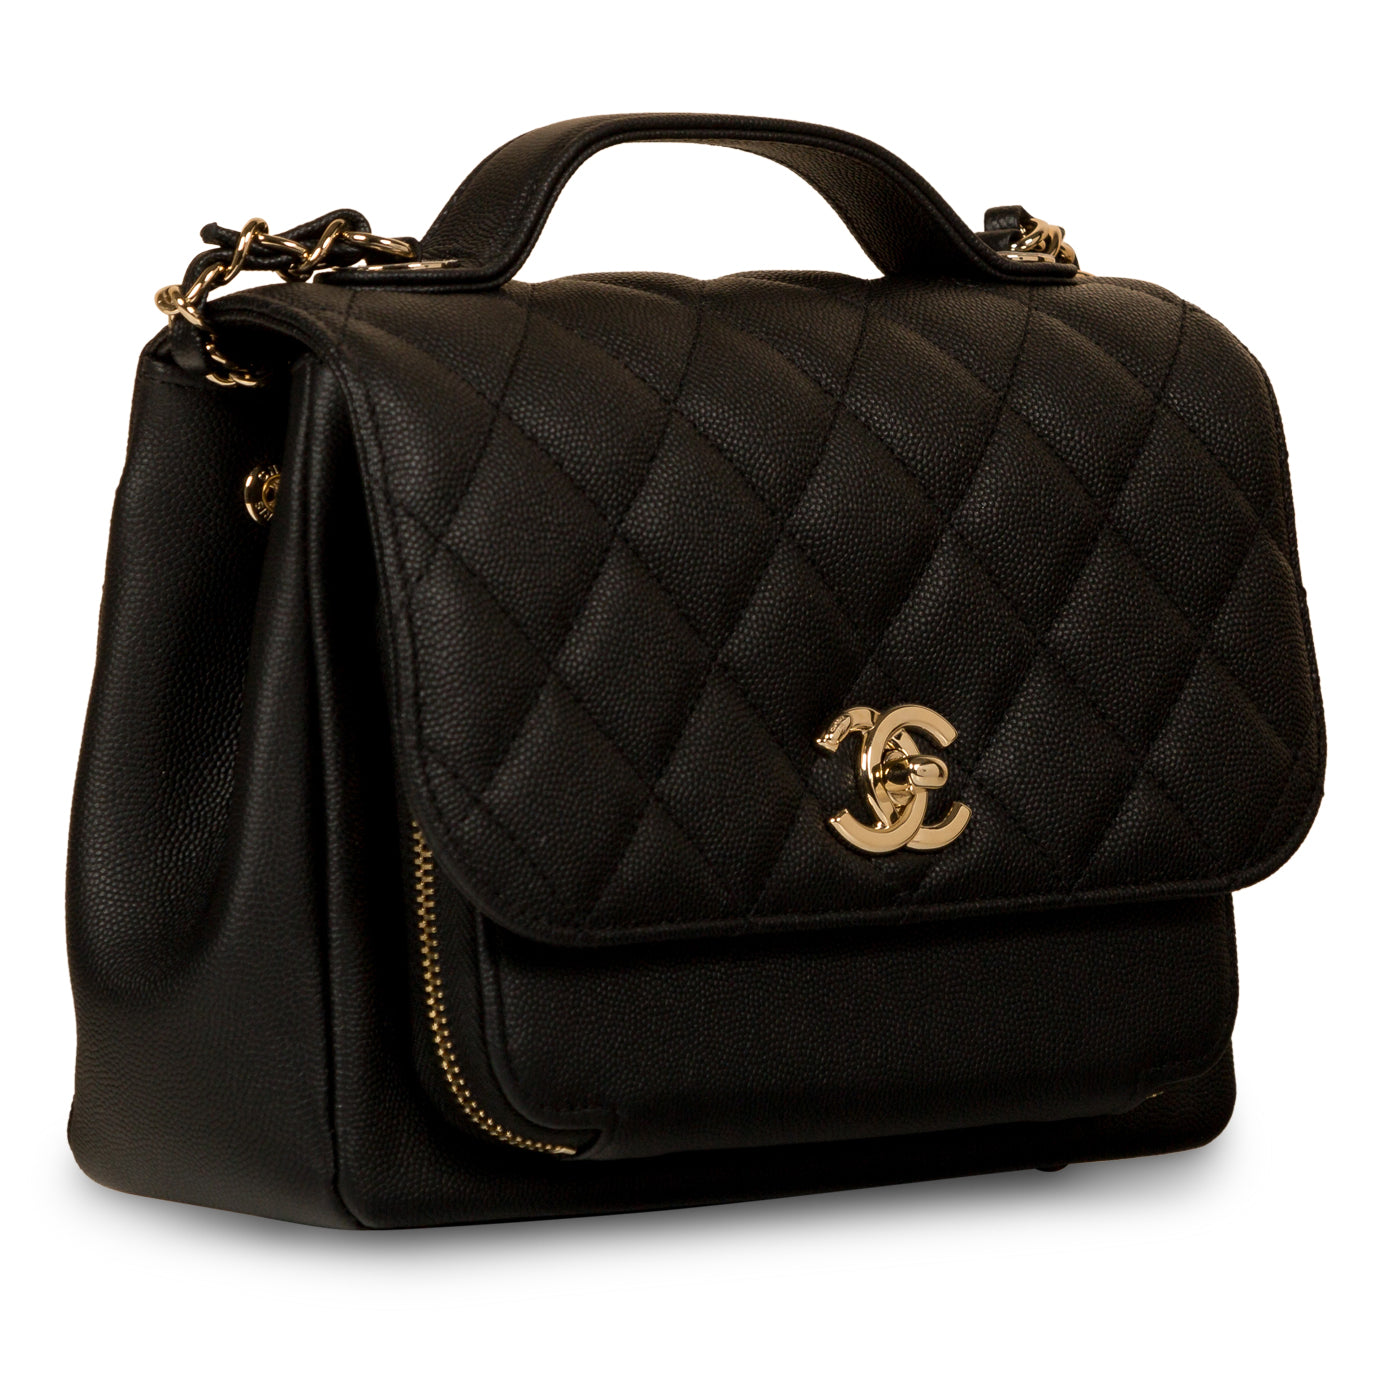 Shop CHANEL CHANEL mini Business Affinity BAG A93749B05052NG752 by